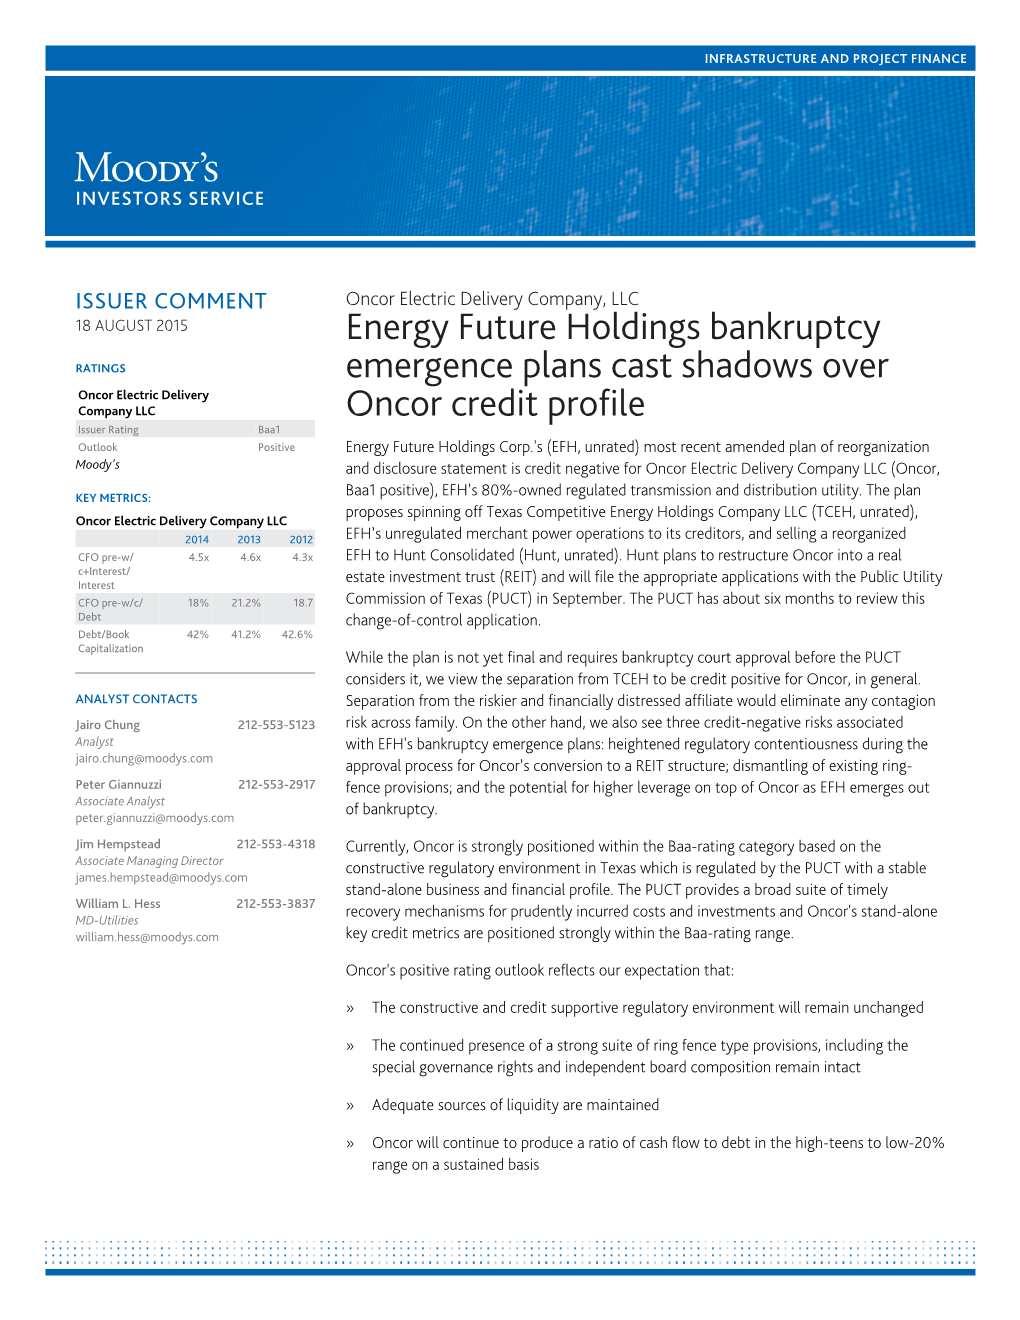 Energy Future Holdings Bankruptcy Emergence Plans Cast Shadows Over Oncor Credit Profile Moody's Investors Service Infrastructure and Project Finance